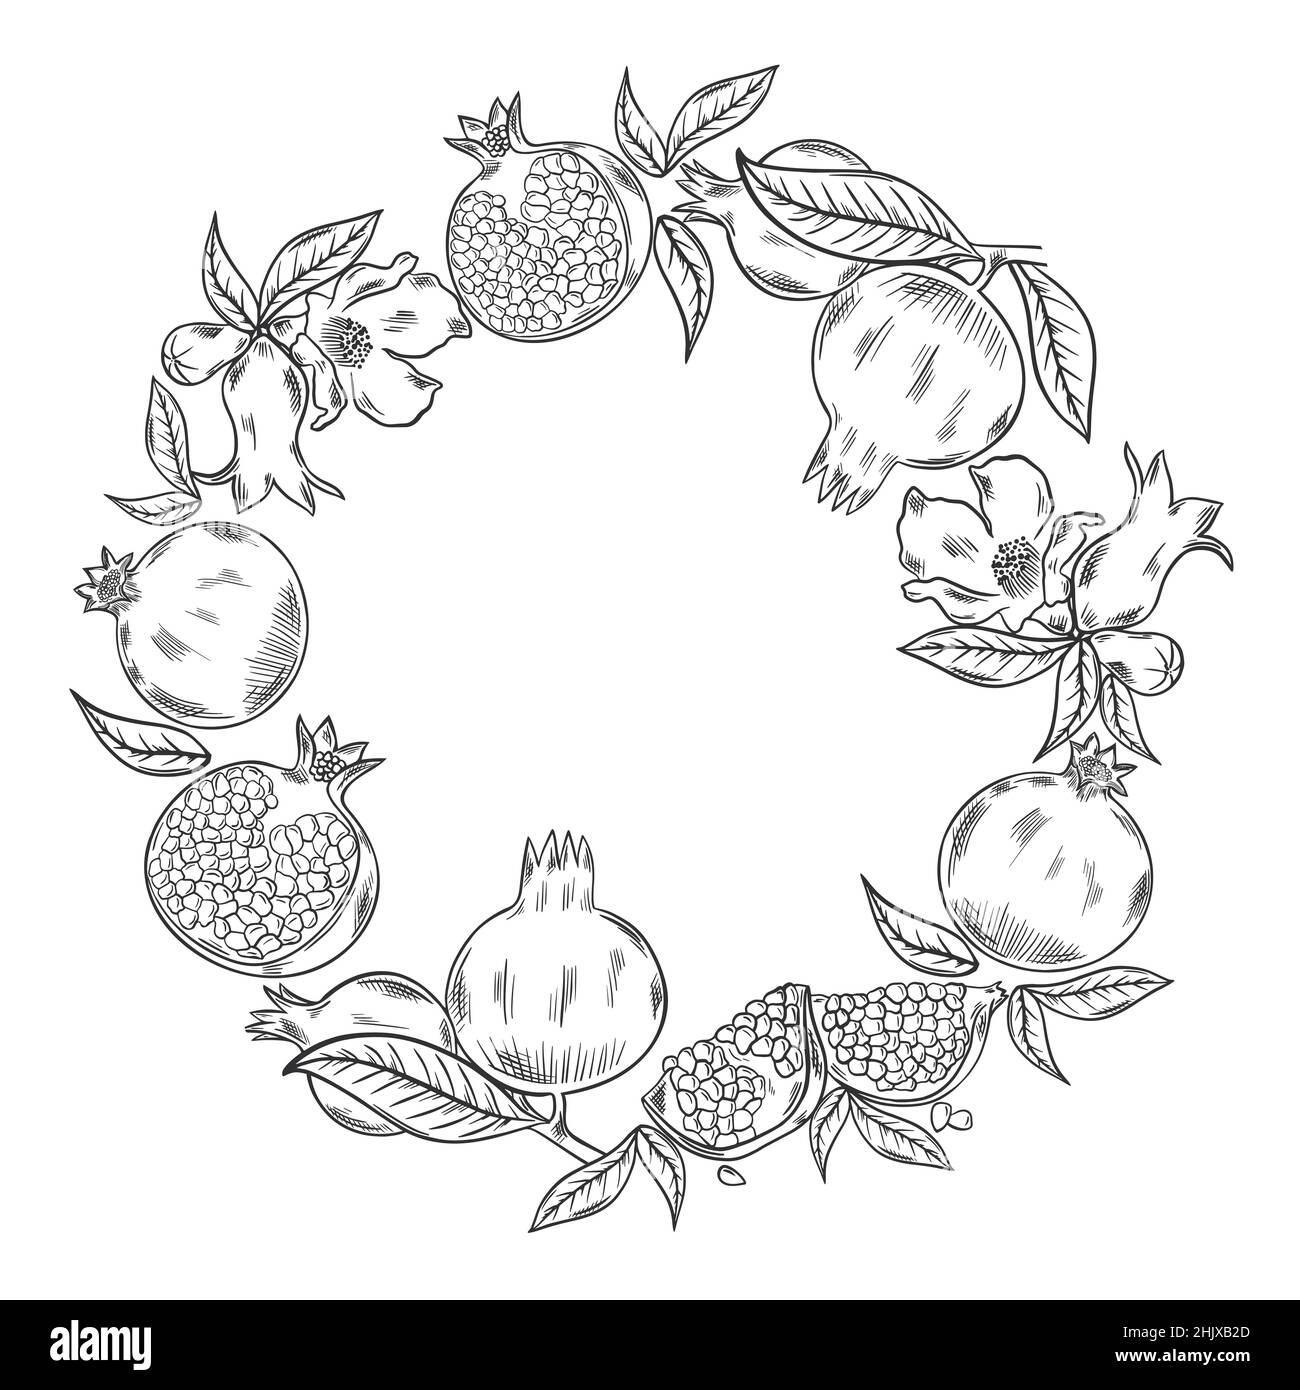 Pomegranate fruits and flowers circular composition Stock Vector